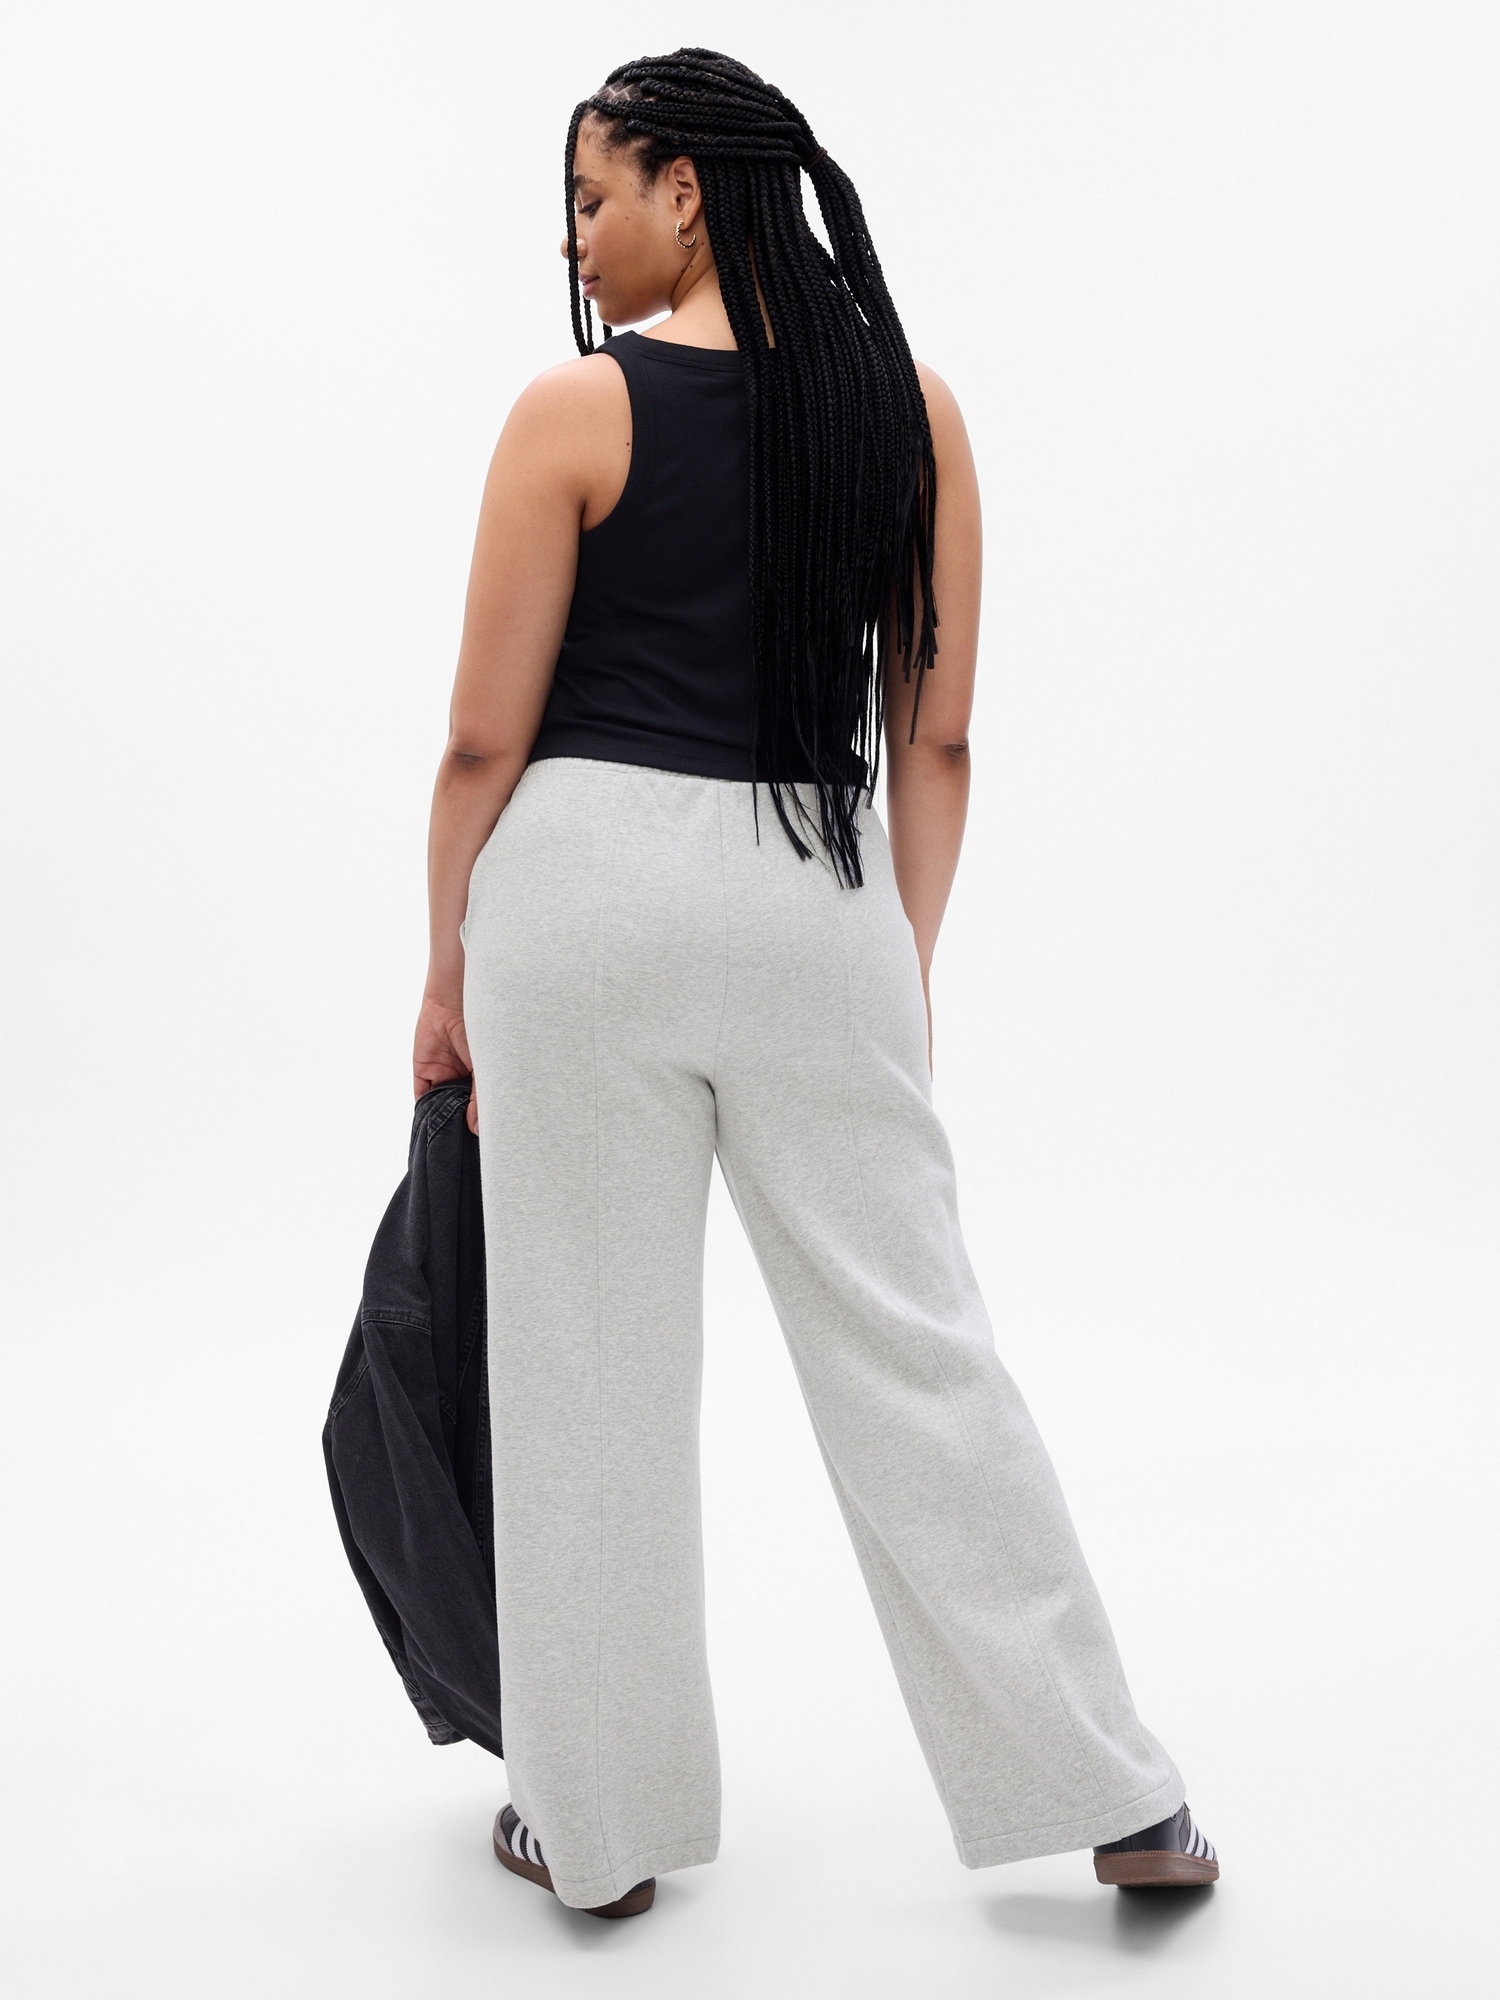 Page 5 - Women's Joggers, Straight & Wide Leg Tracksuit Bottoms